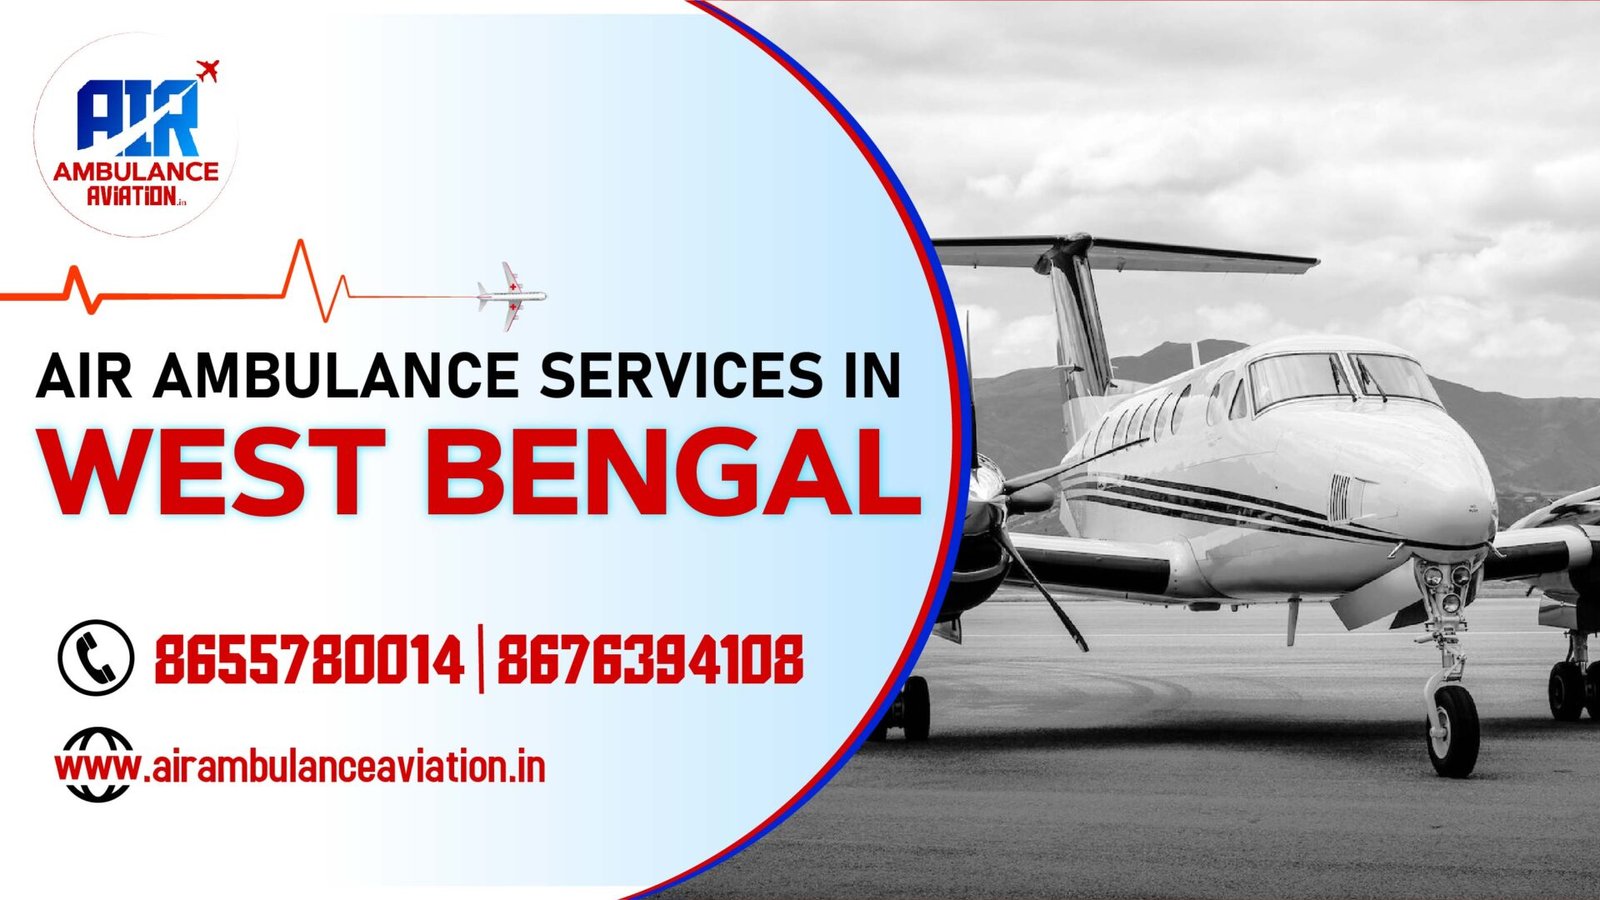 Air Ambulance services in West Bengal